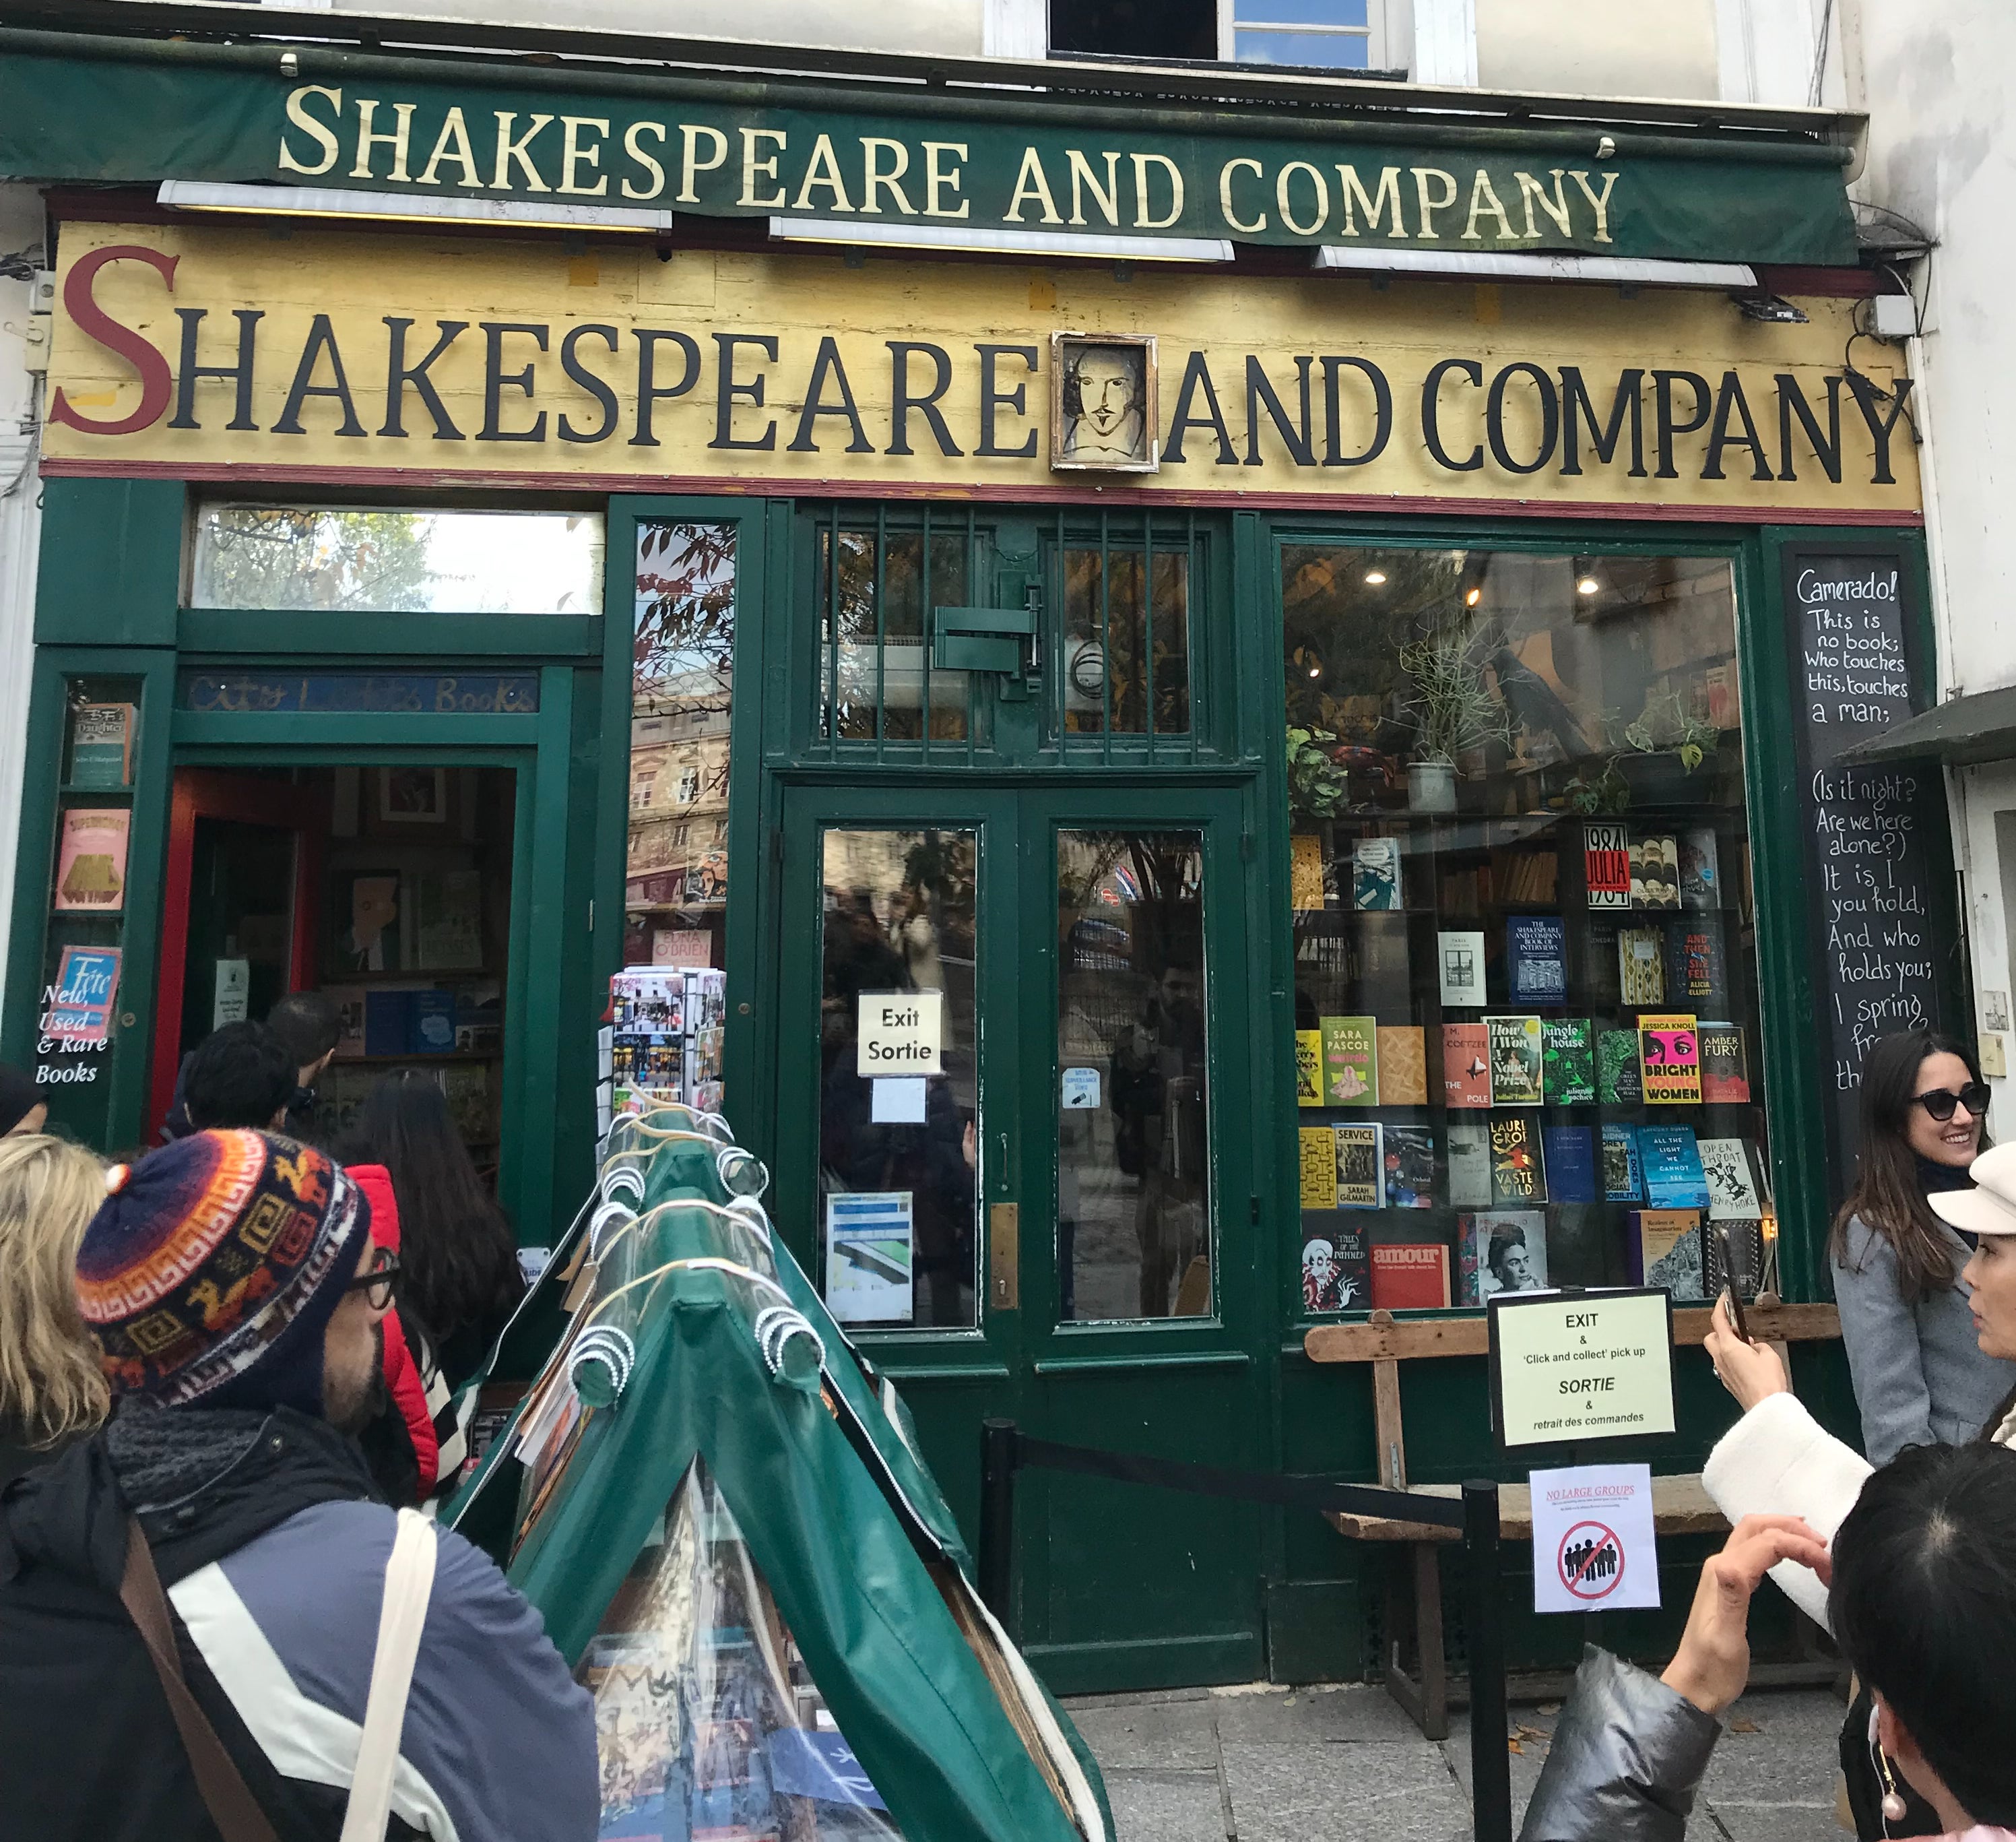 Selfie-seekers are drawn to Shakespeare and Company